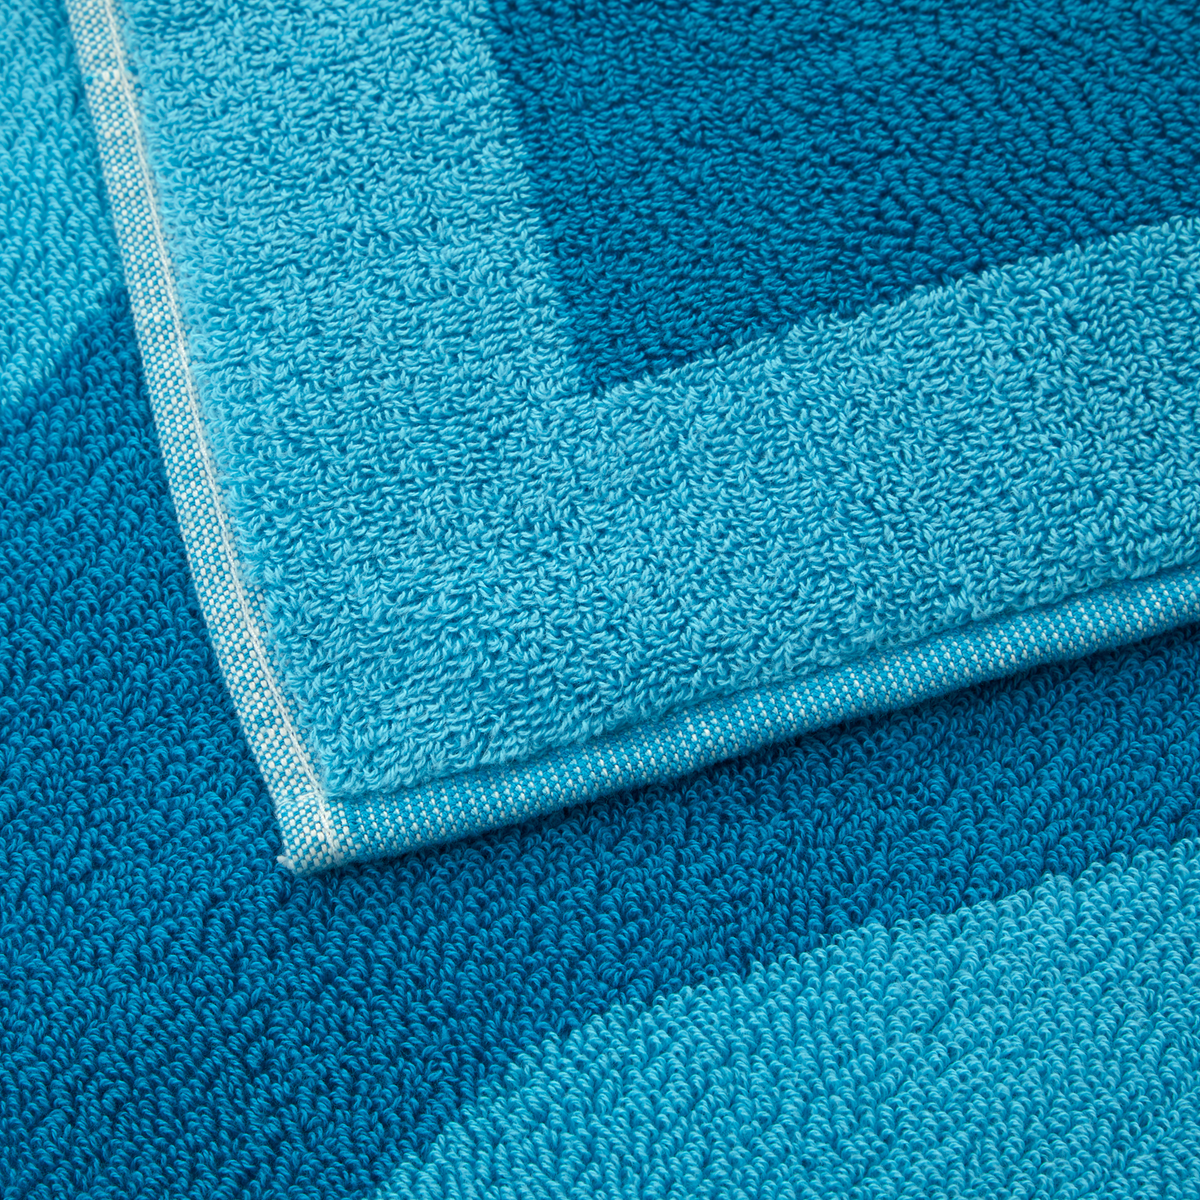 Close Up Image of Yves Delorme Griffe Beach Towel in Jacuzzi Color